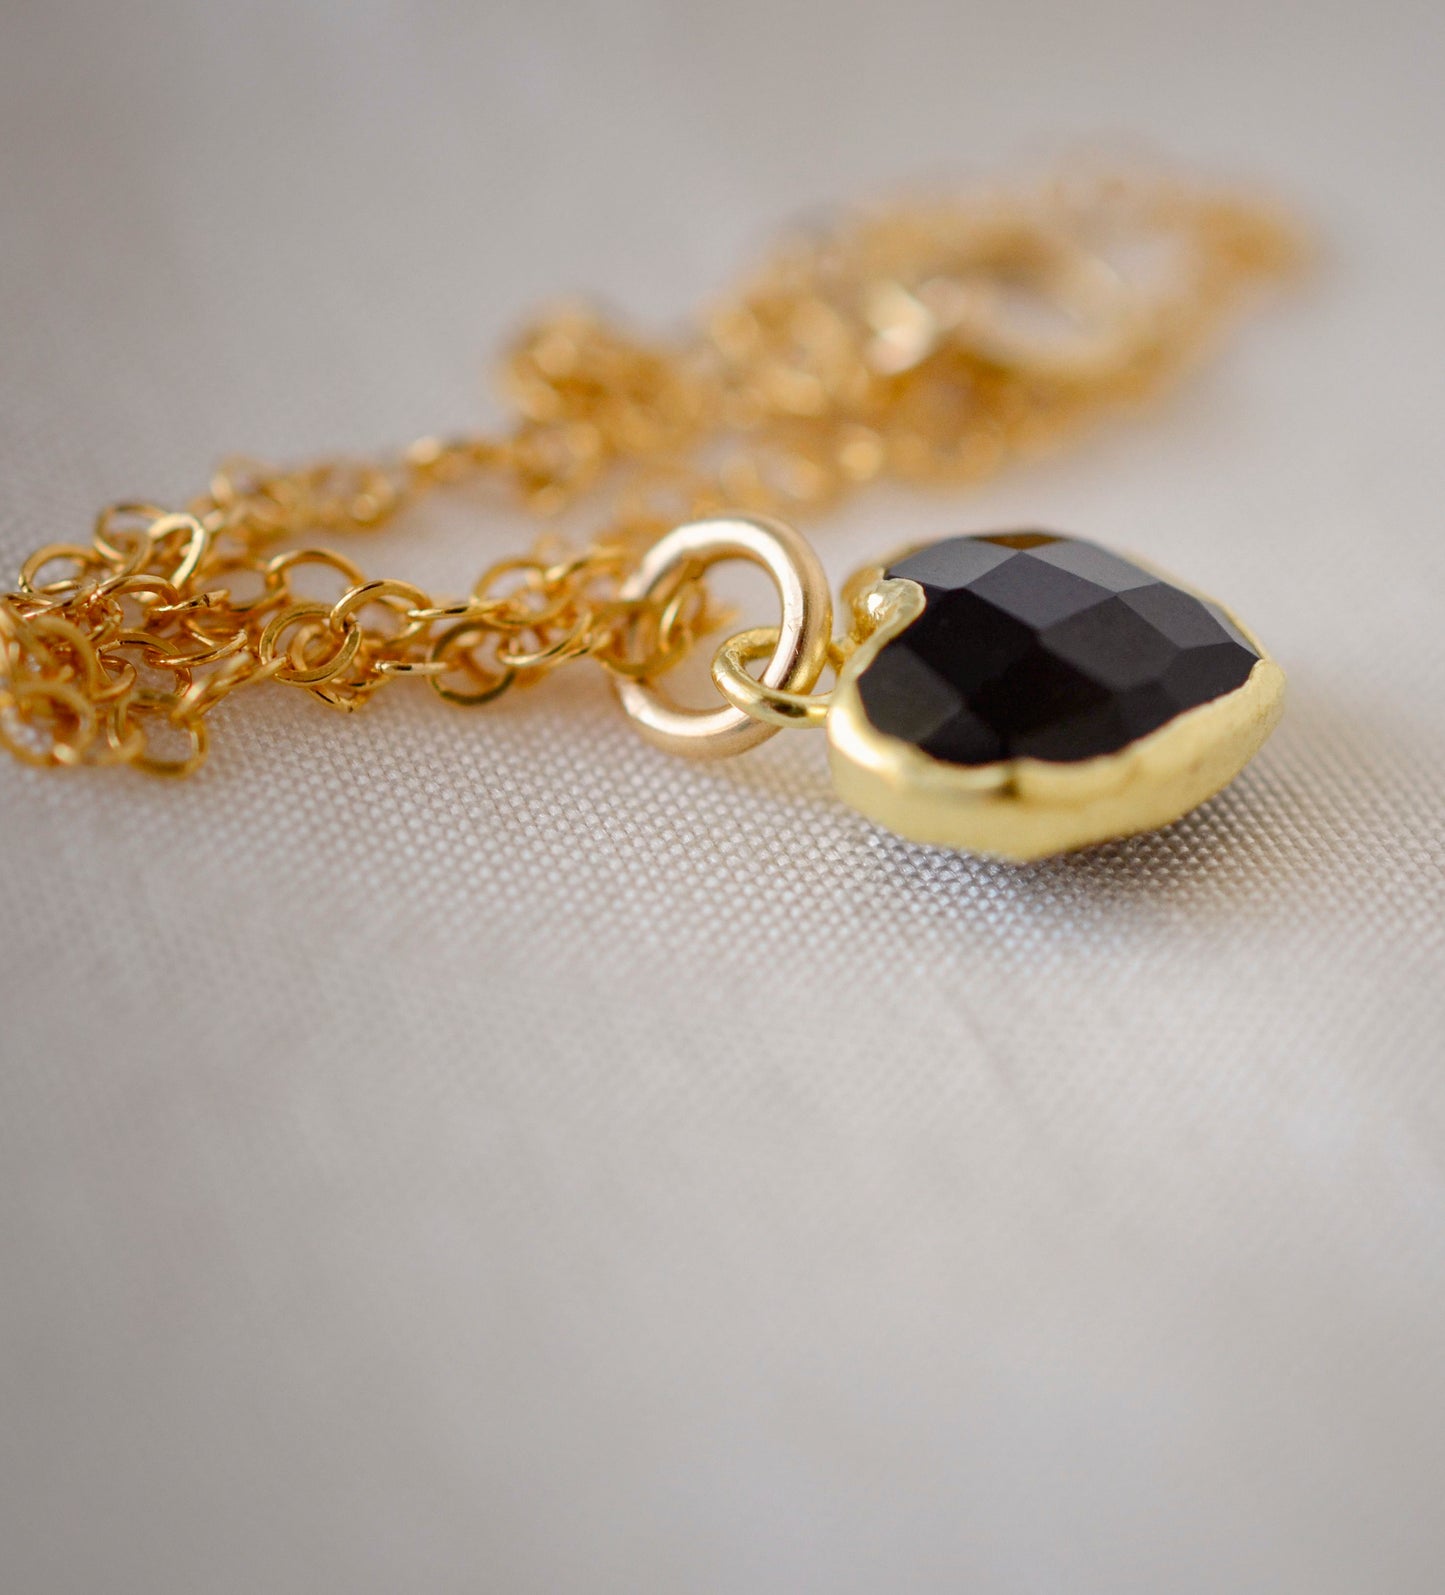 Black Onyx gold heart necklace. A black stone heart bezeled in gold is suspended from a 14k gold filled chain.